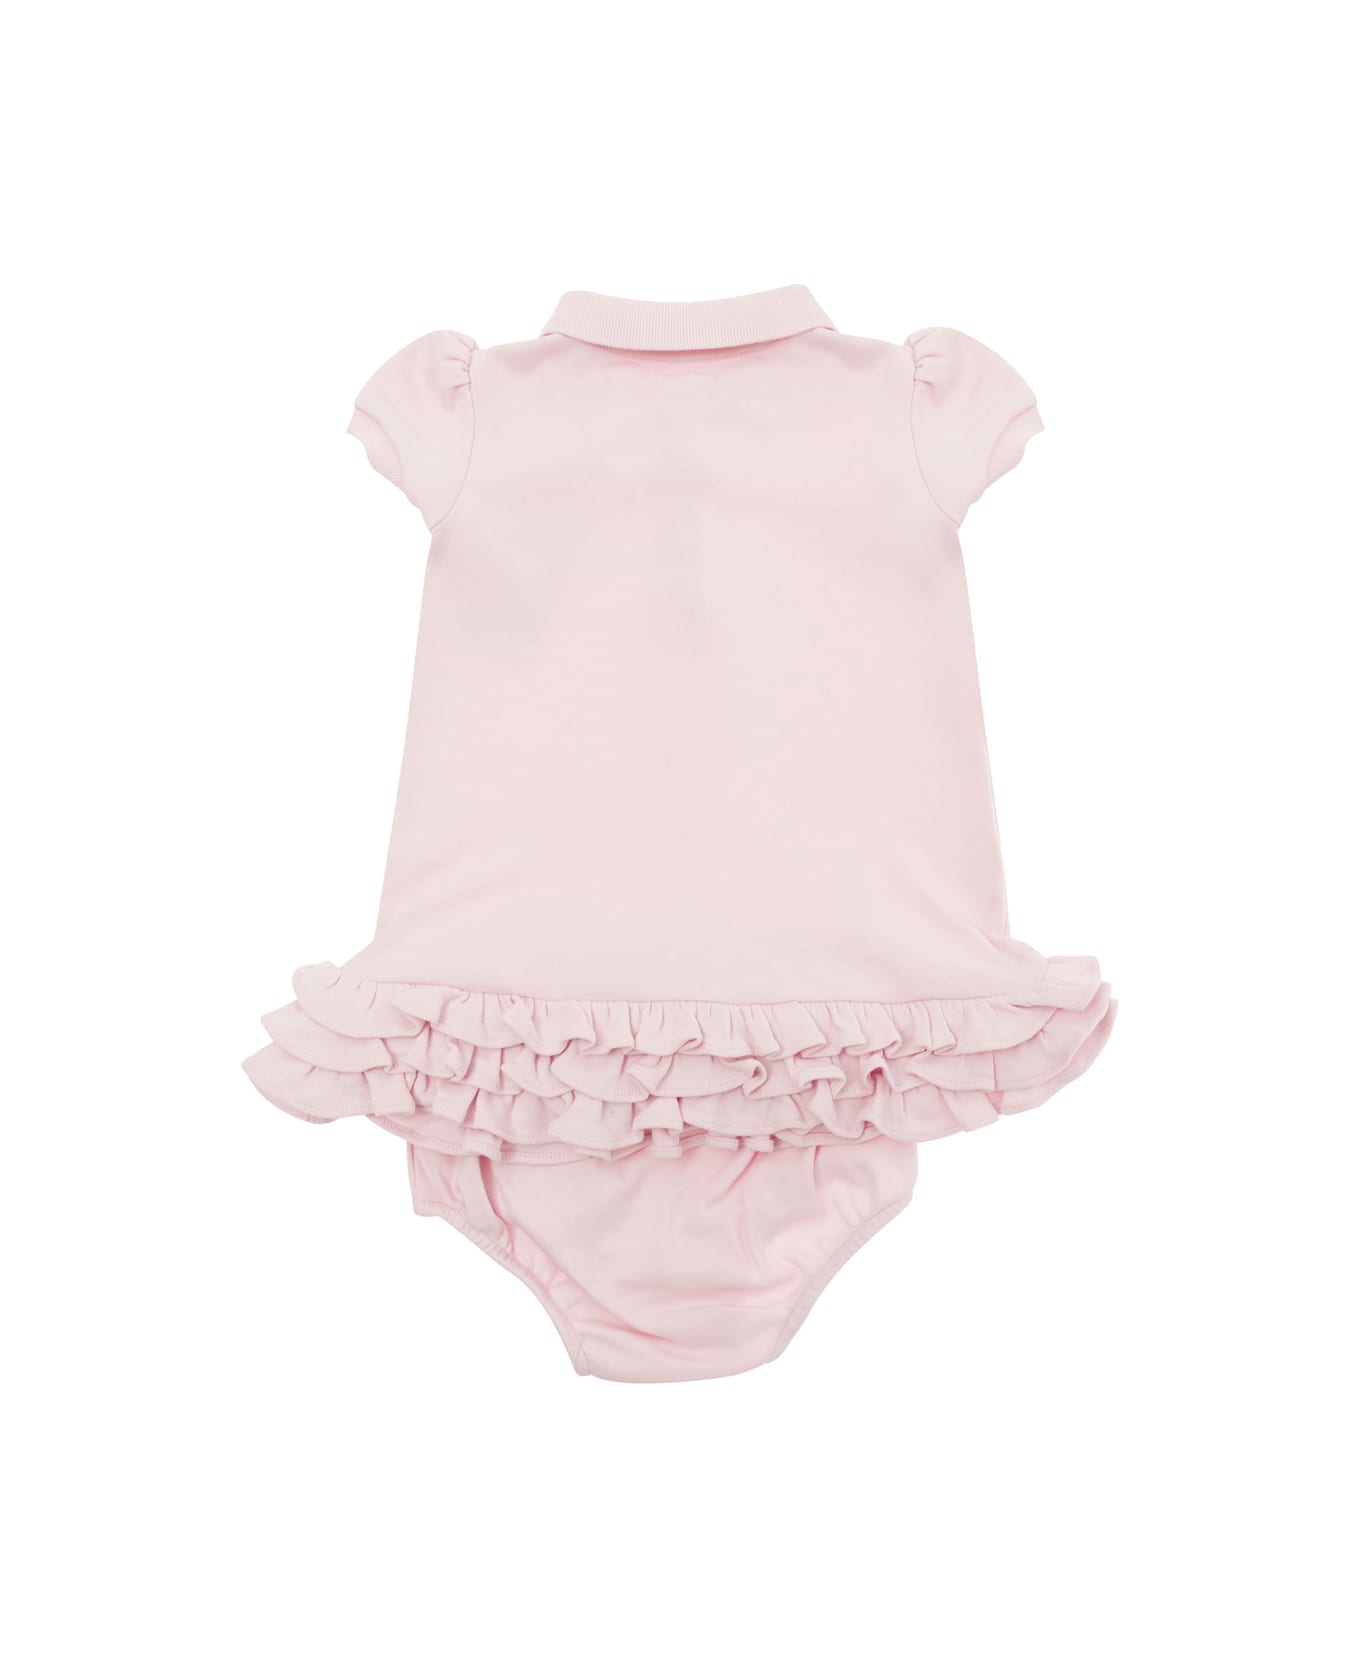 Polo Ralph Lauren Pink Dress With Embroidered Pony In Cotton Baby - Pink